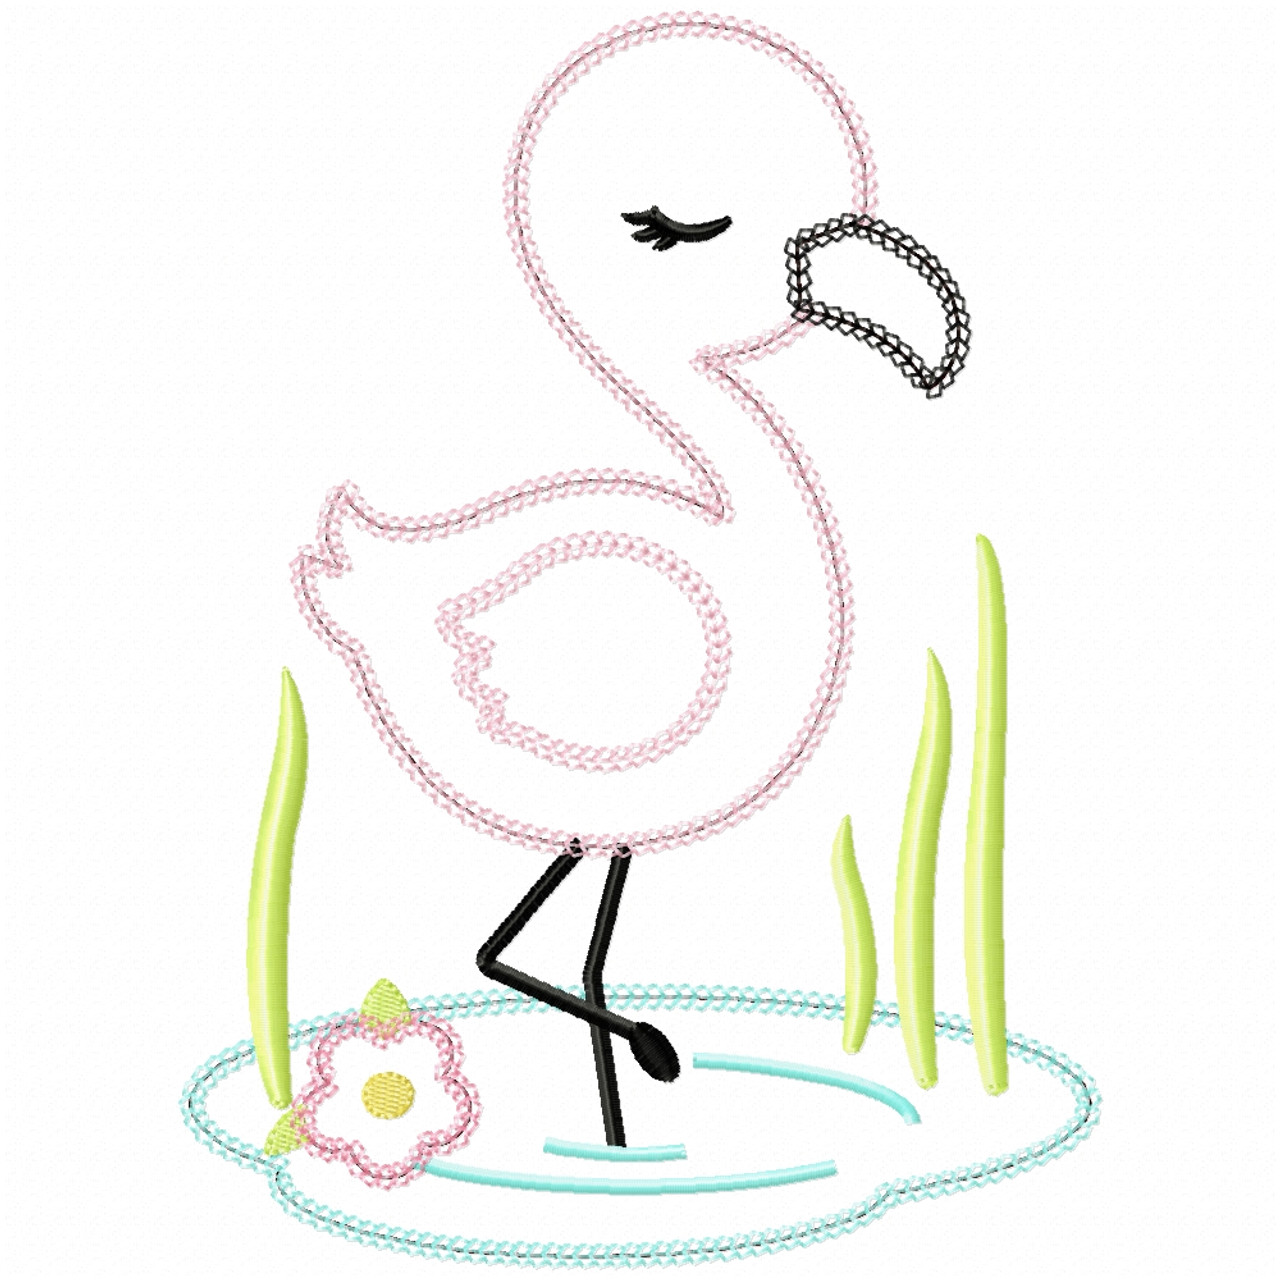 Wading Flamingo Vintage and Chain Applique Embroidery Machine Design